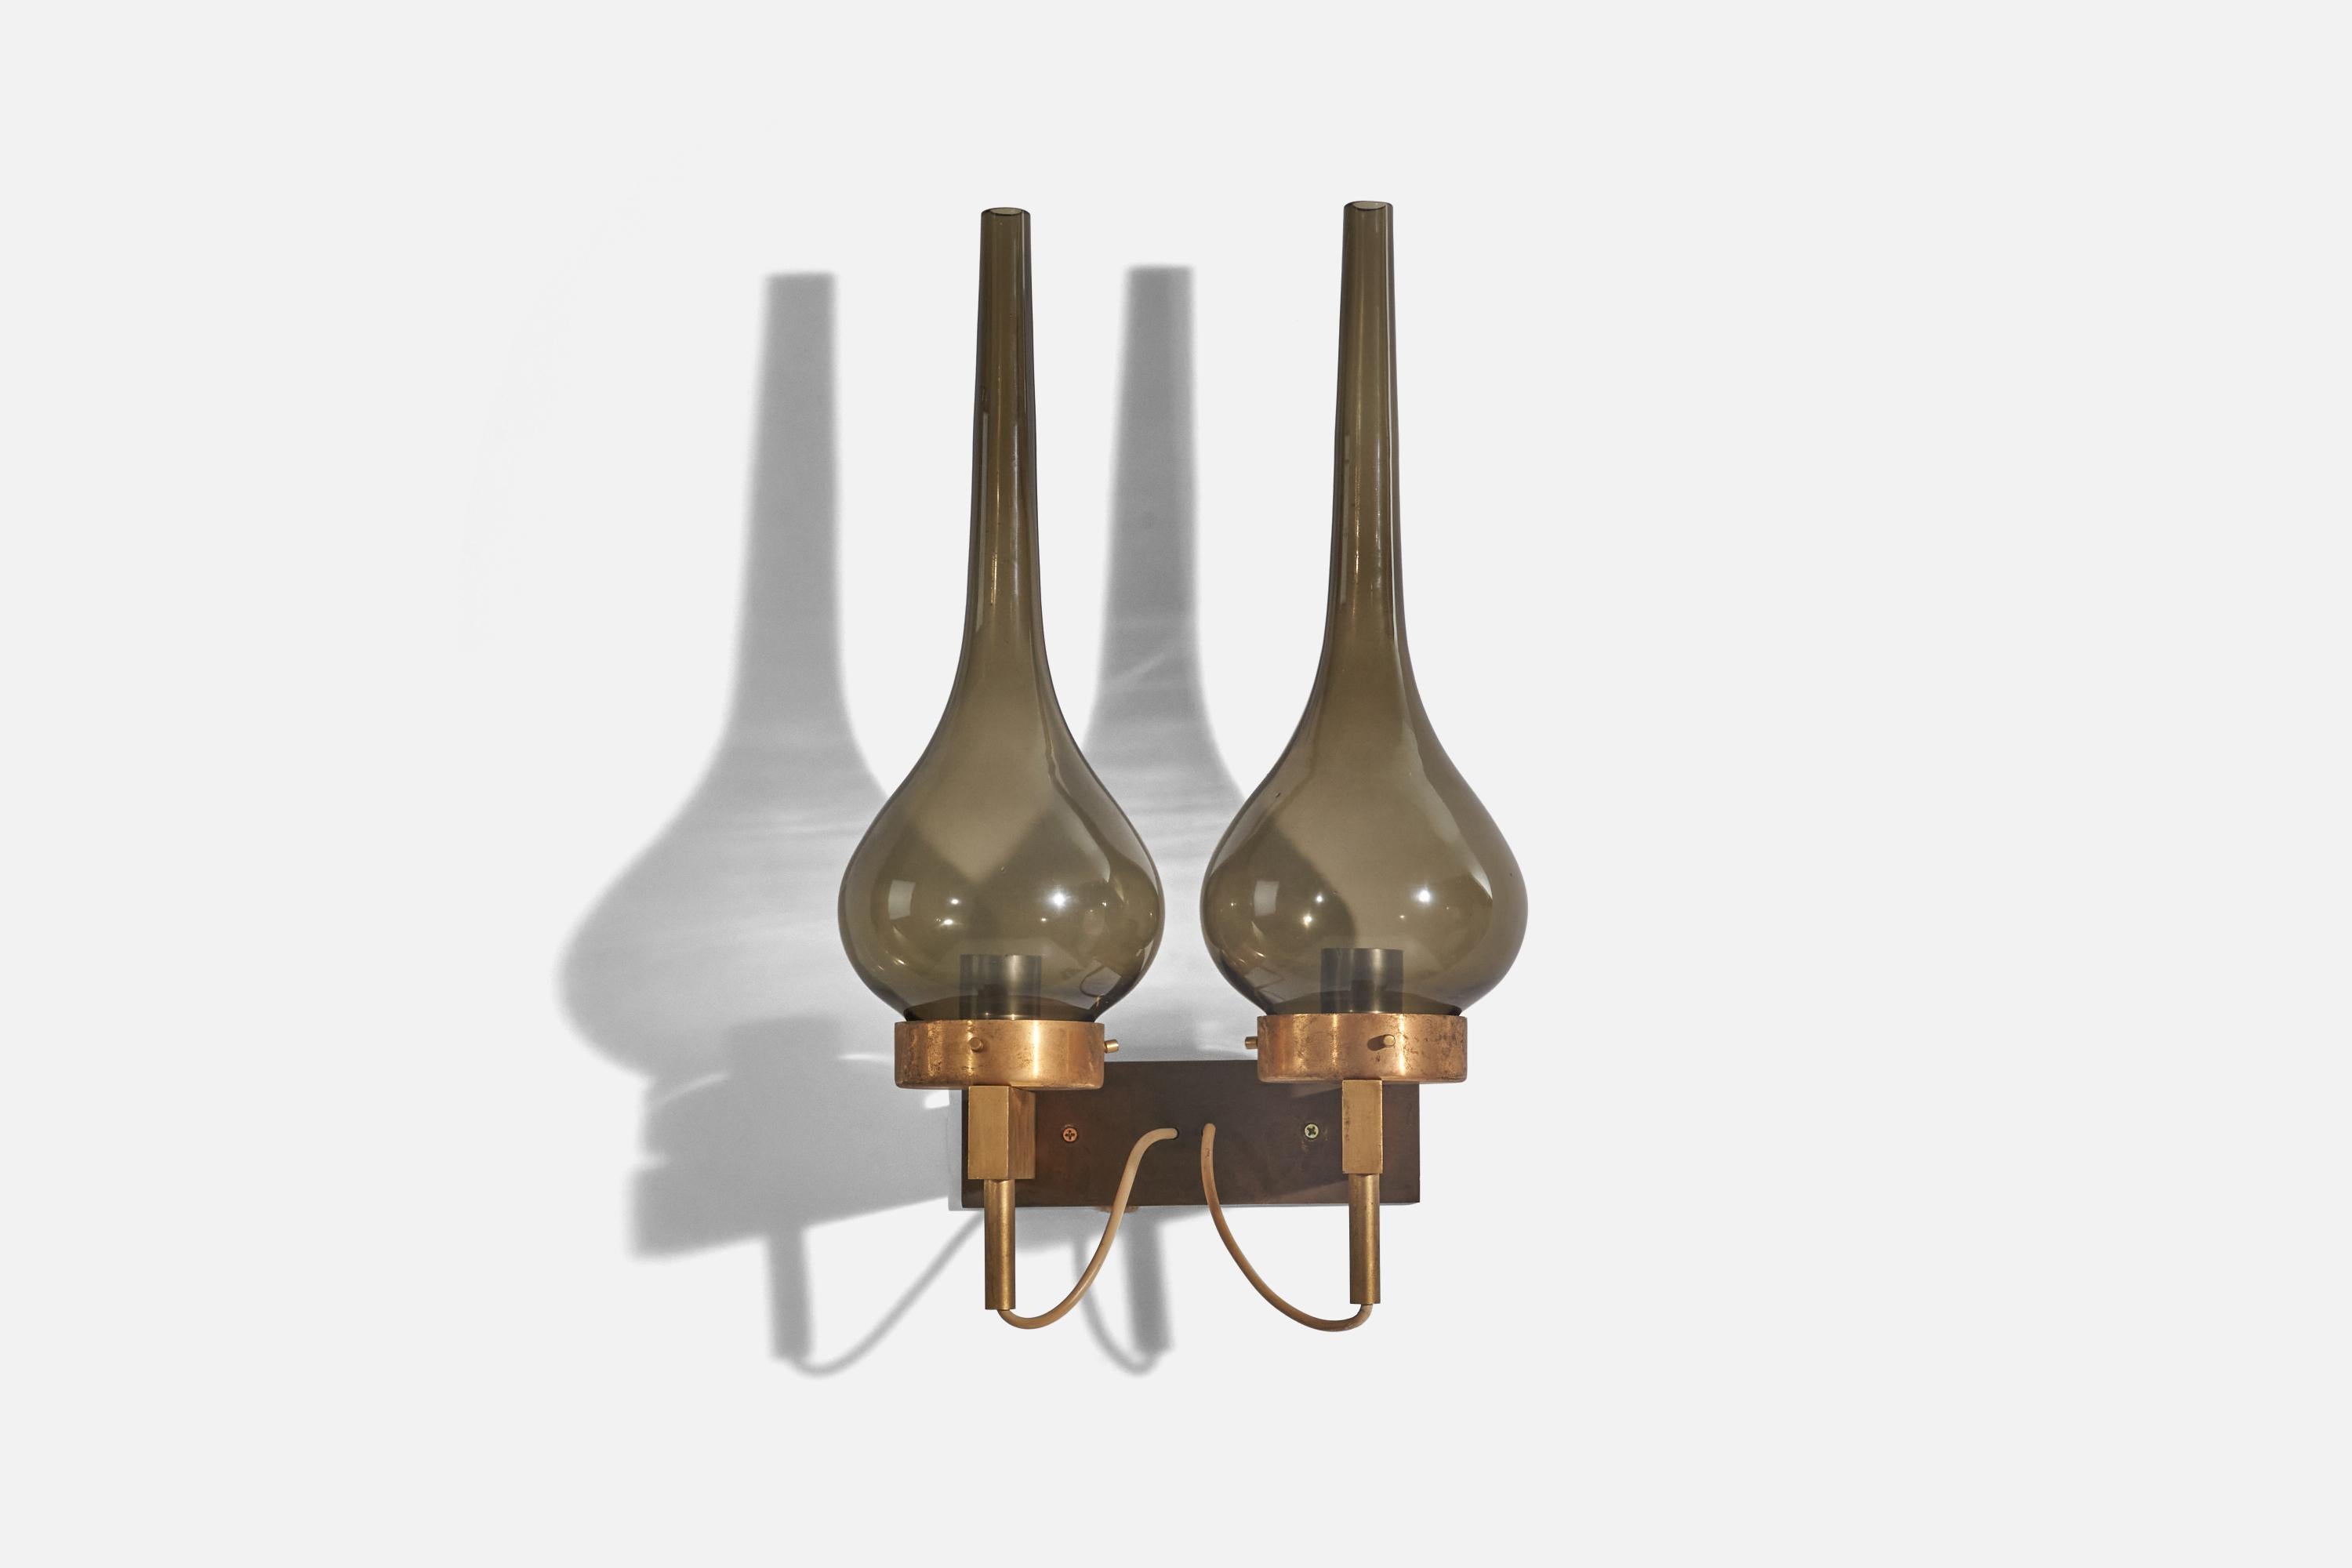 Mid-20th Century Italian Designer, Wall Lights, Brass, Smoked Glass, 1950s For Sale